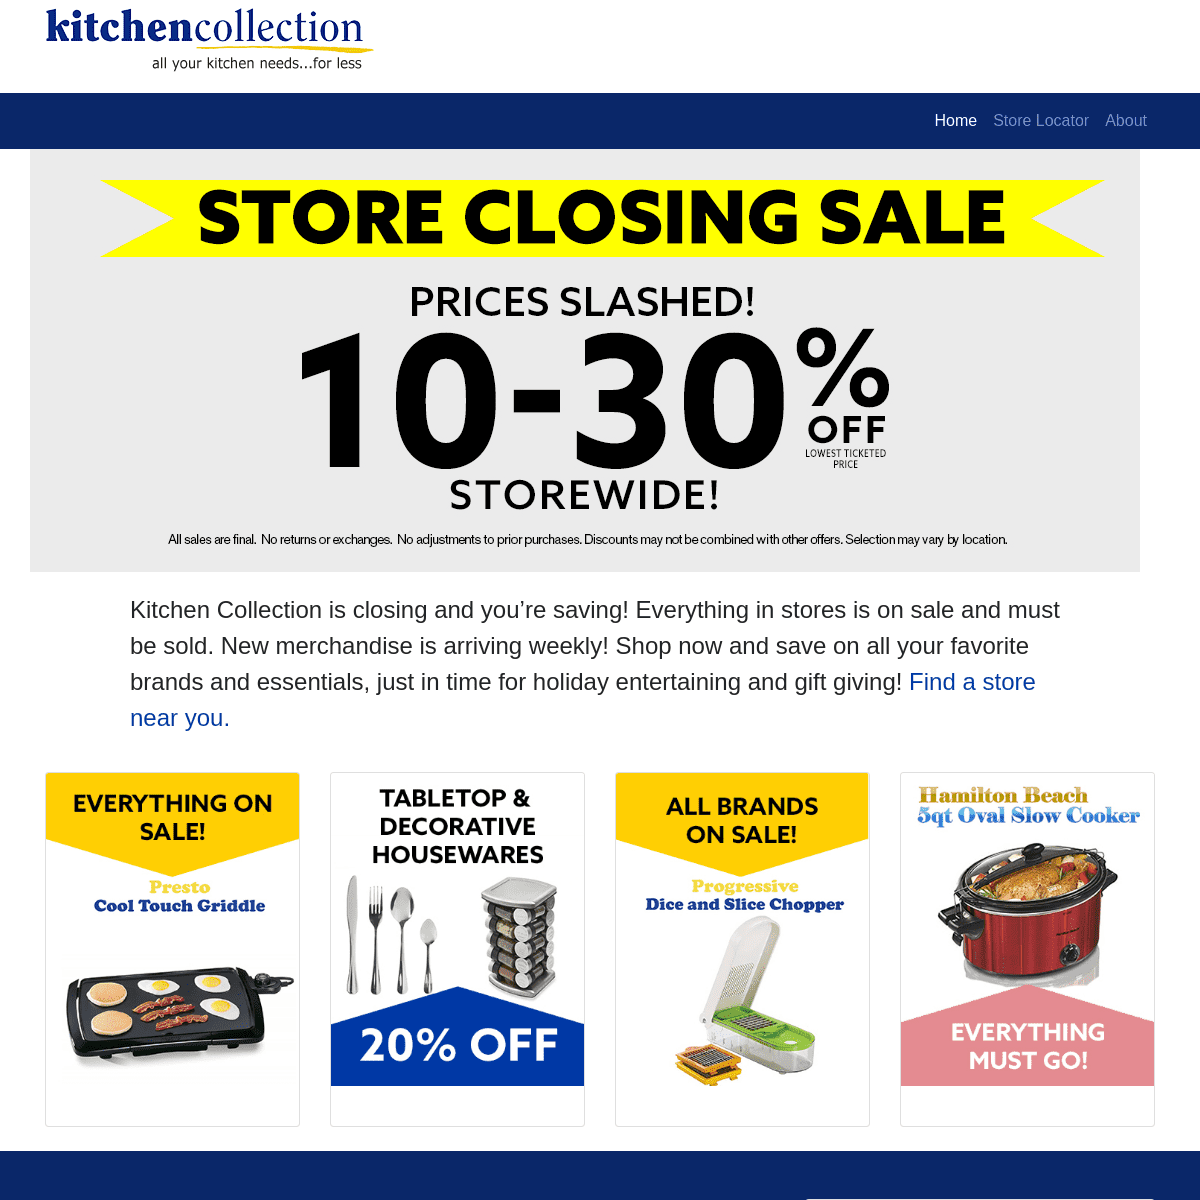 A complete backup of kitchencollection.com